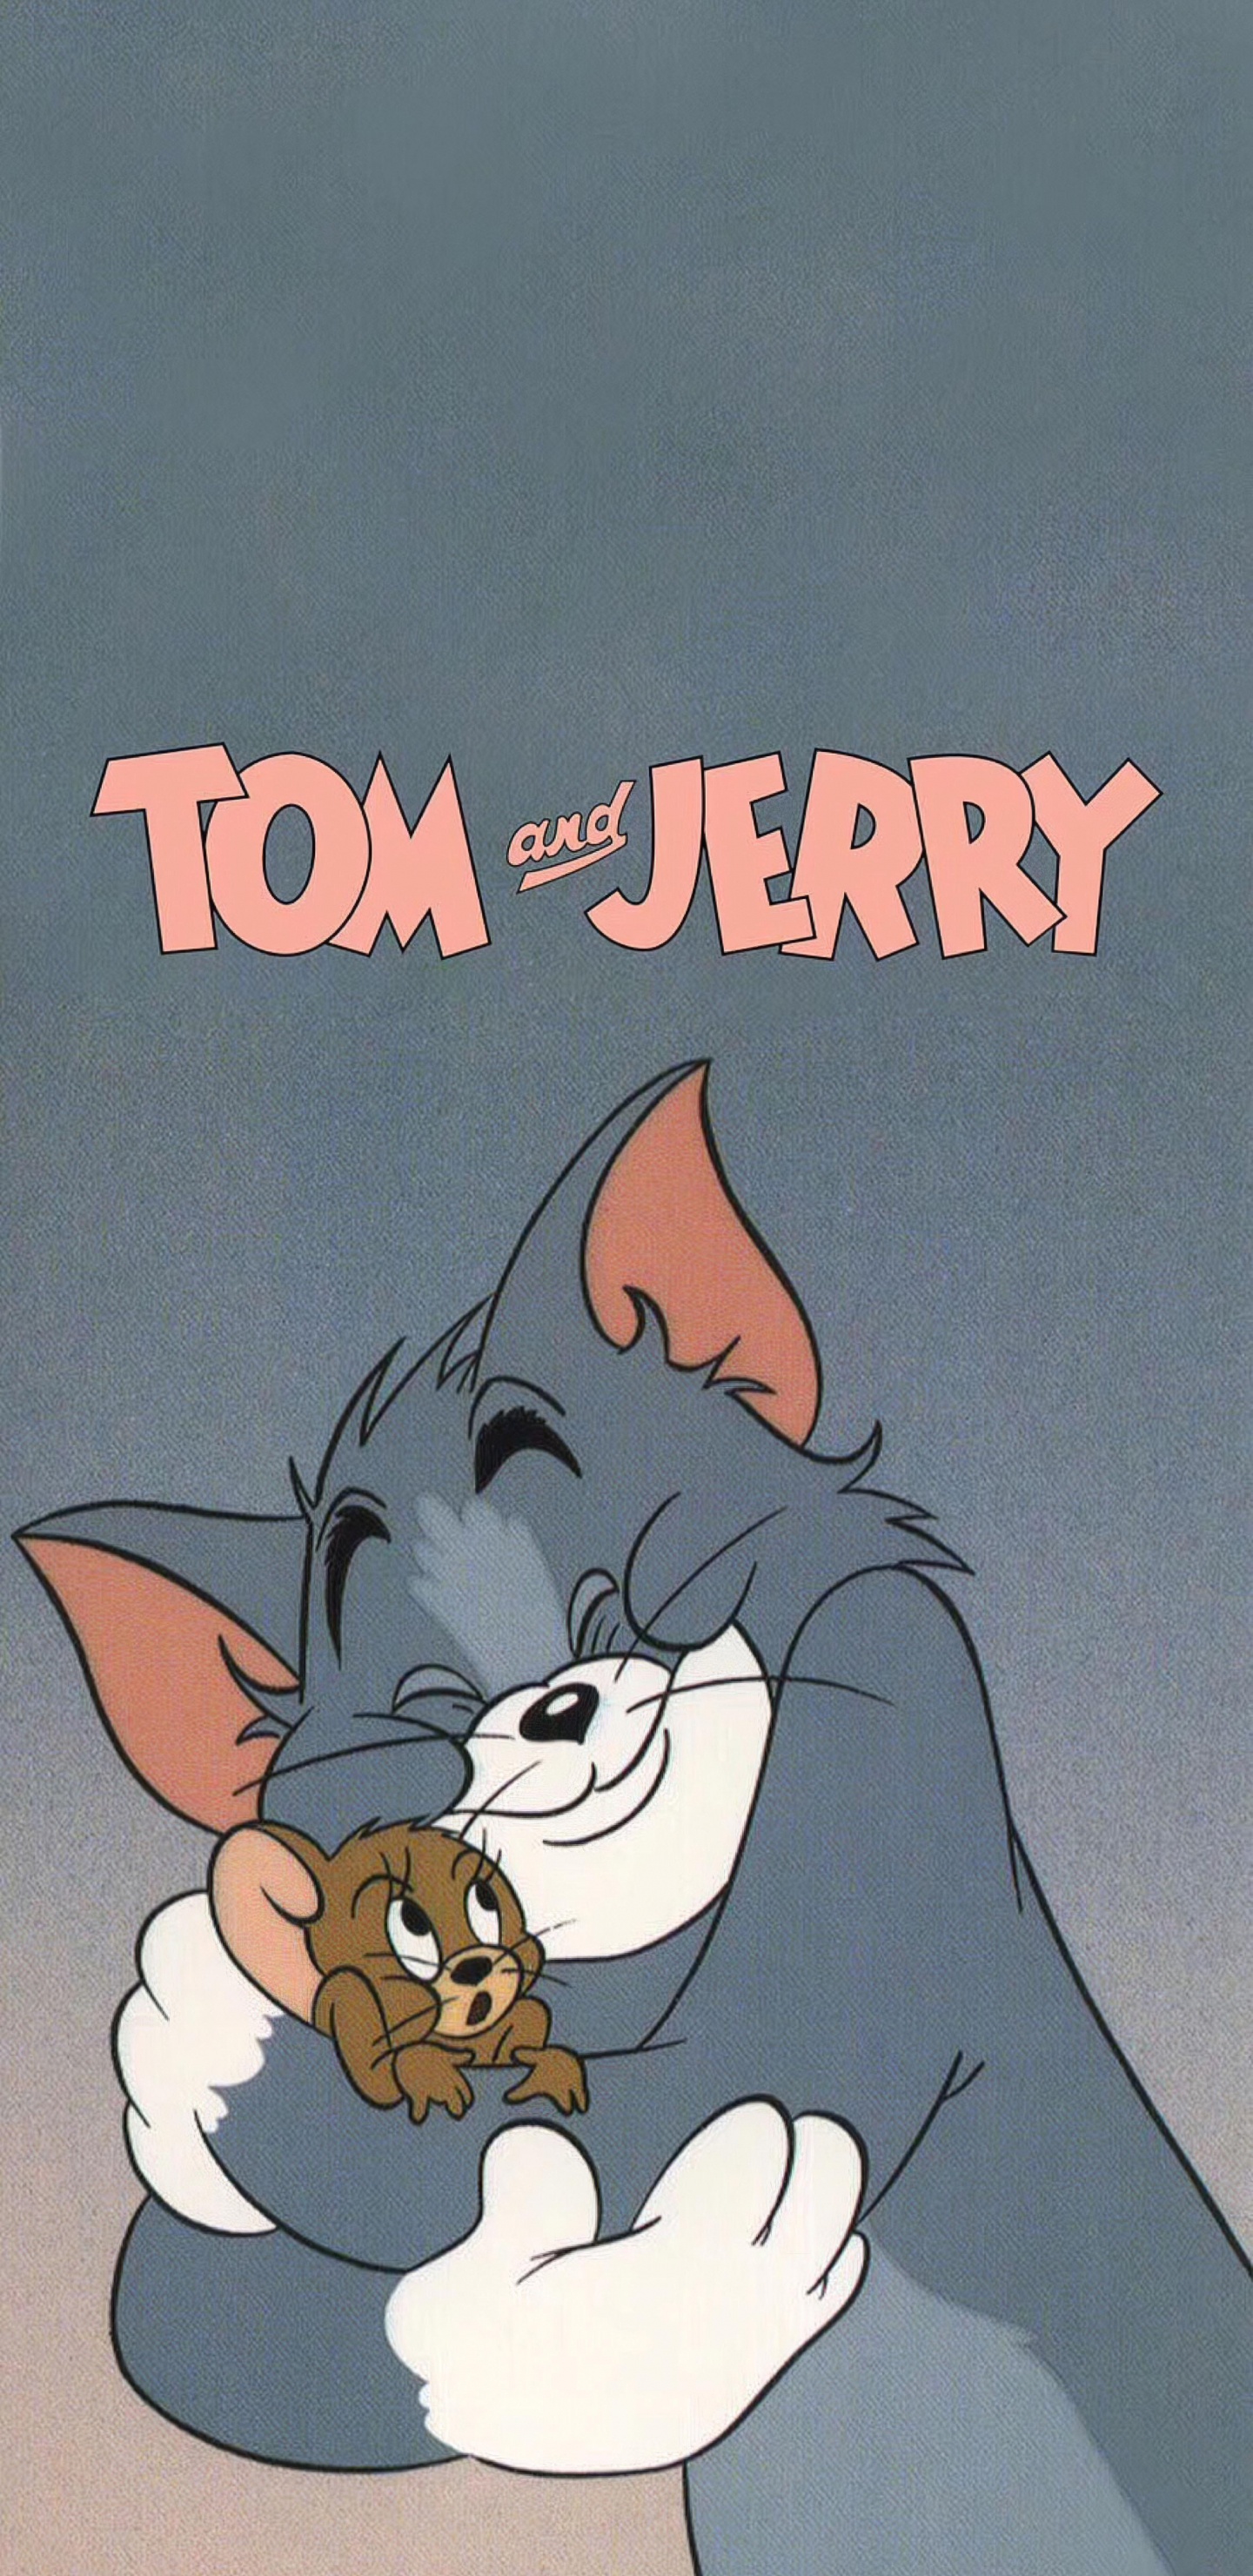 Tom and Jerry Aesthetic, Tom Cat, Jerry Mouse, Aesthetics, Cartoon. Wallpaper in 1440x2960 Resolution